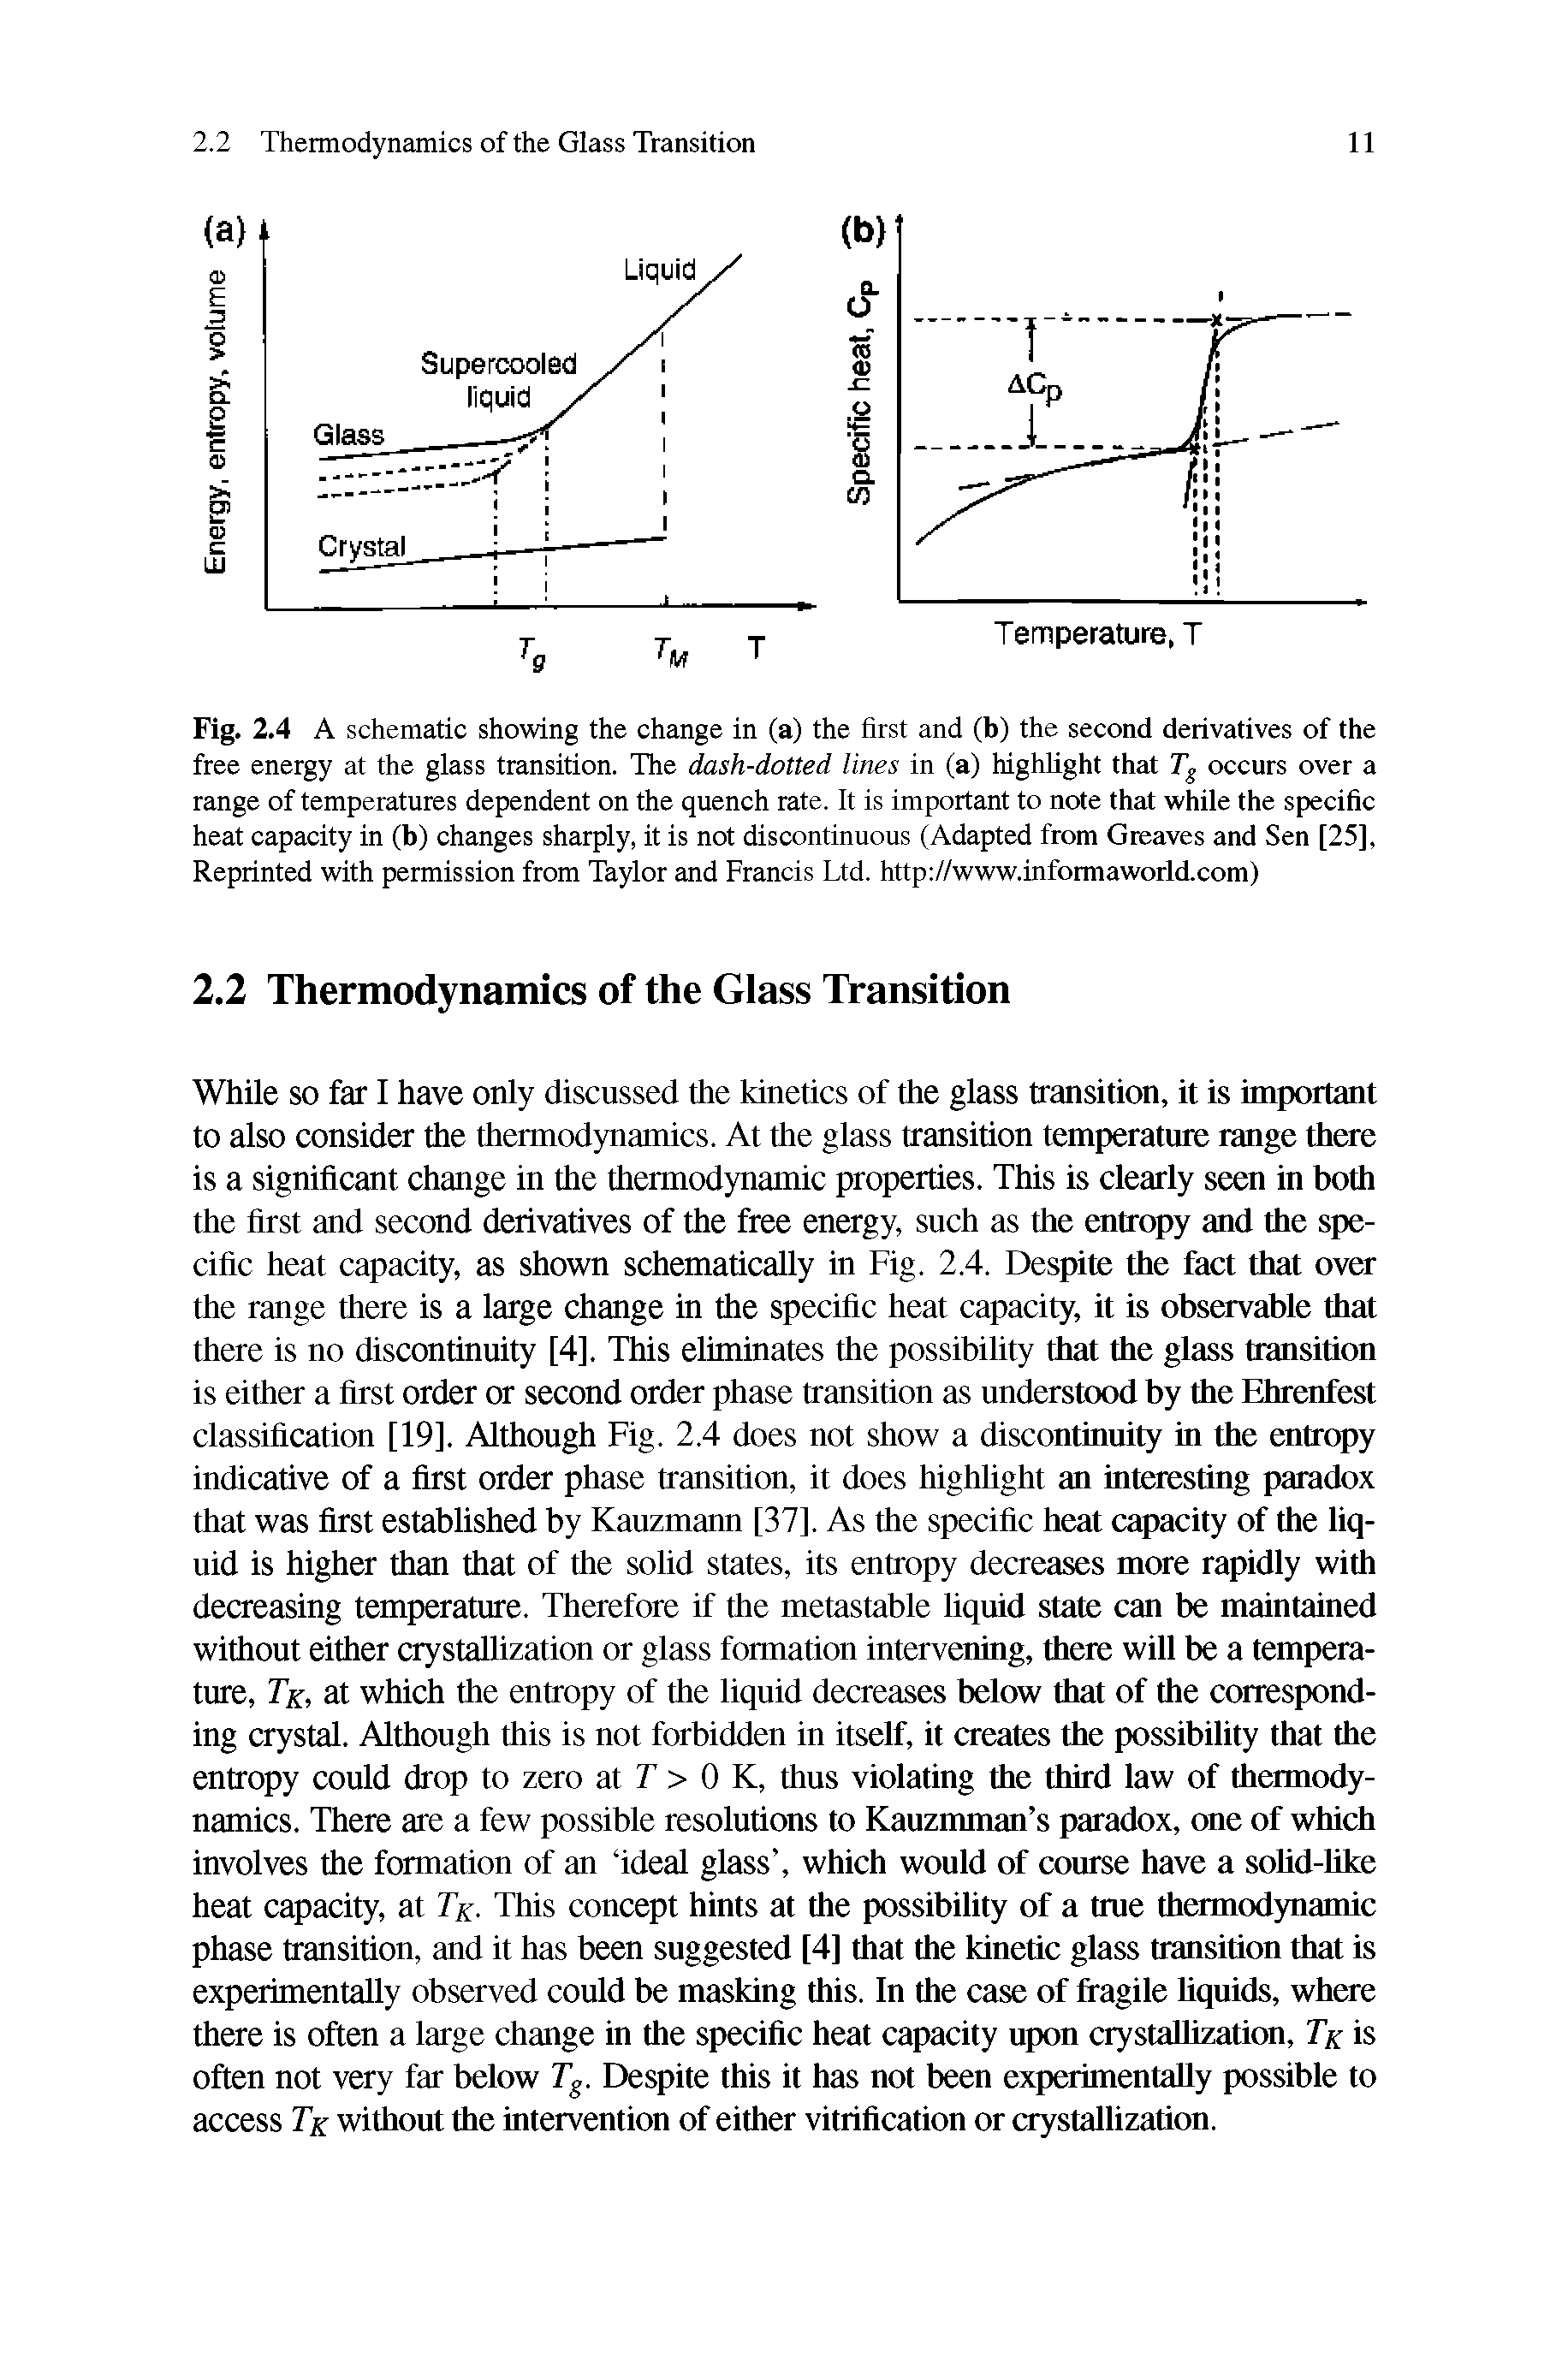 Fig. 2.4 A schematic showing the change in (a) the first and (b) the second derivatives of the free energy at the glass transition. The dash-dotted lines in (a) highlight that occurs over a range of temperatures dependent on the quench rate. It is important to note that while the specific heat capacity in (b) changes sharply, it is not discontinuous (Adapted from Greaves and Sen [25], Reprinted with permission from Taylor and Francis Ltd. http //www.informaworld.com)...